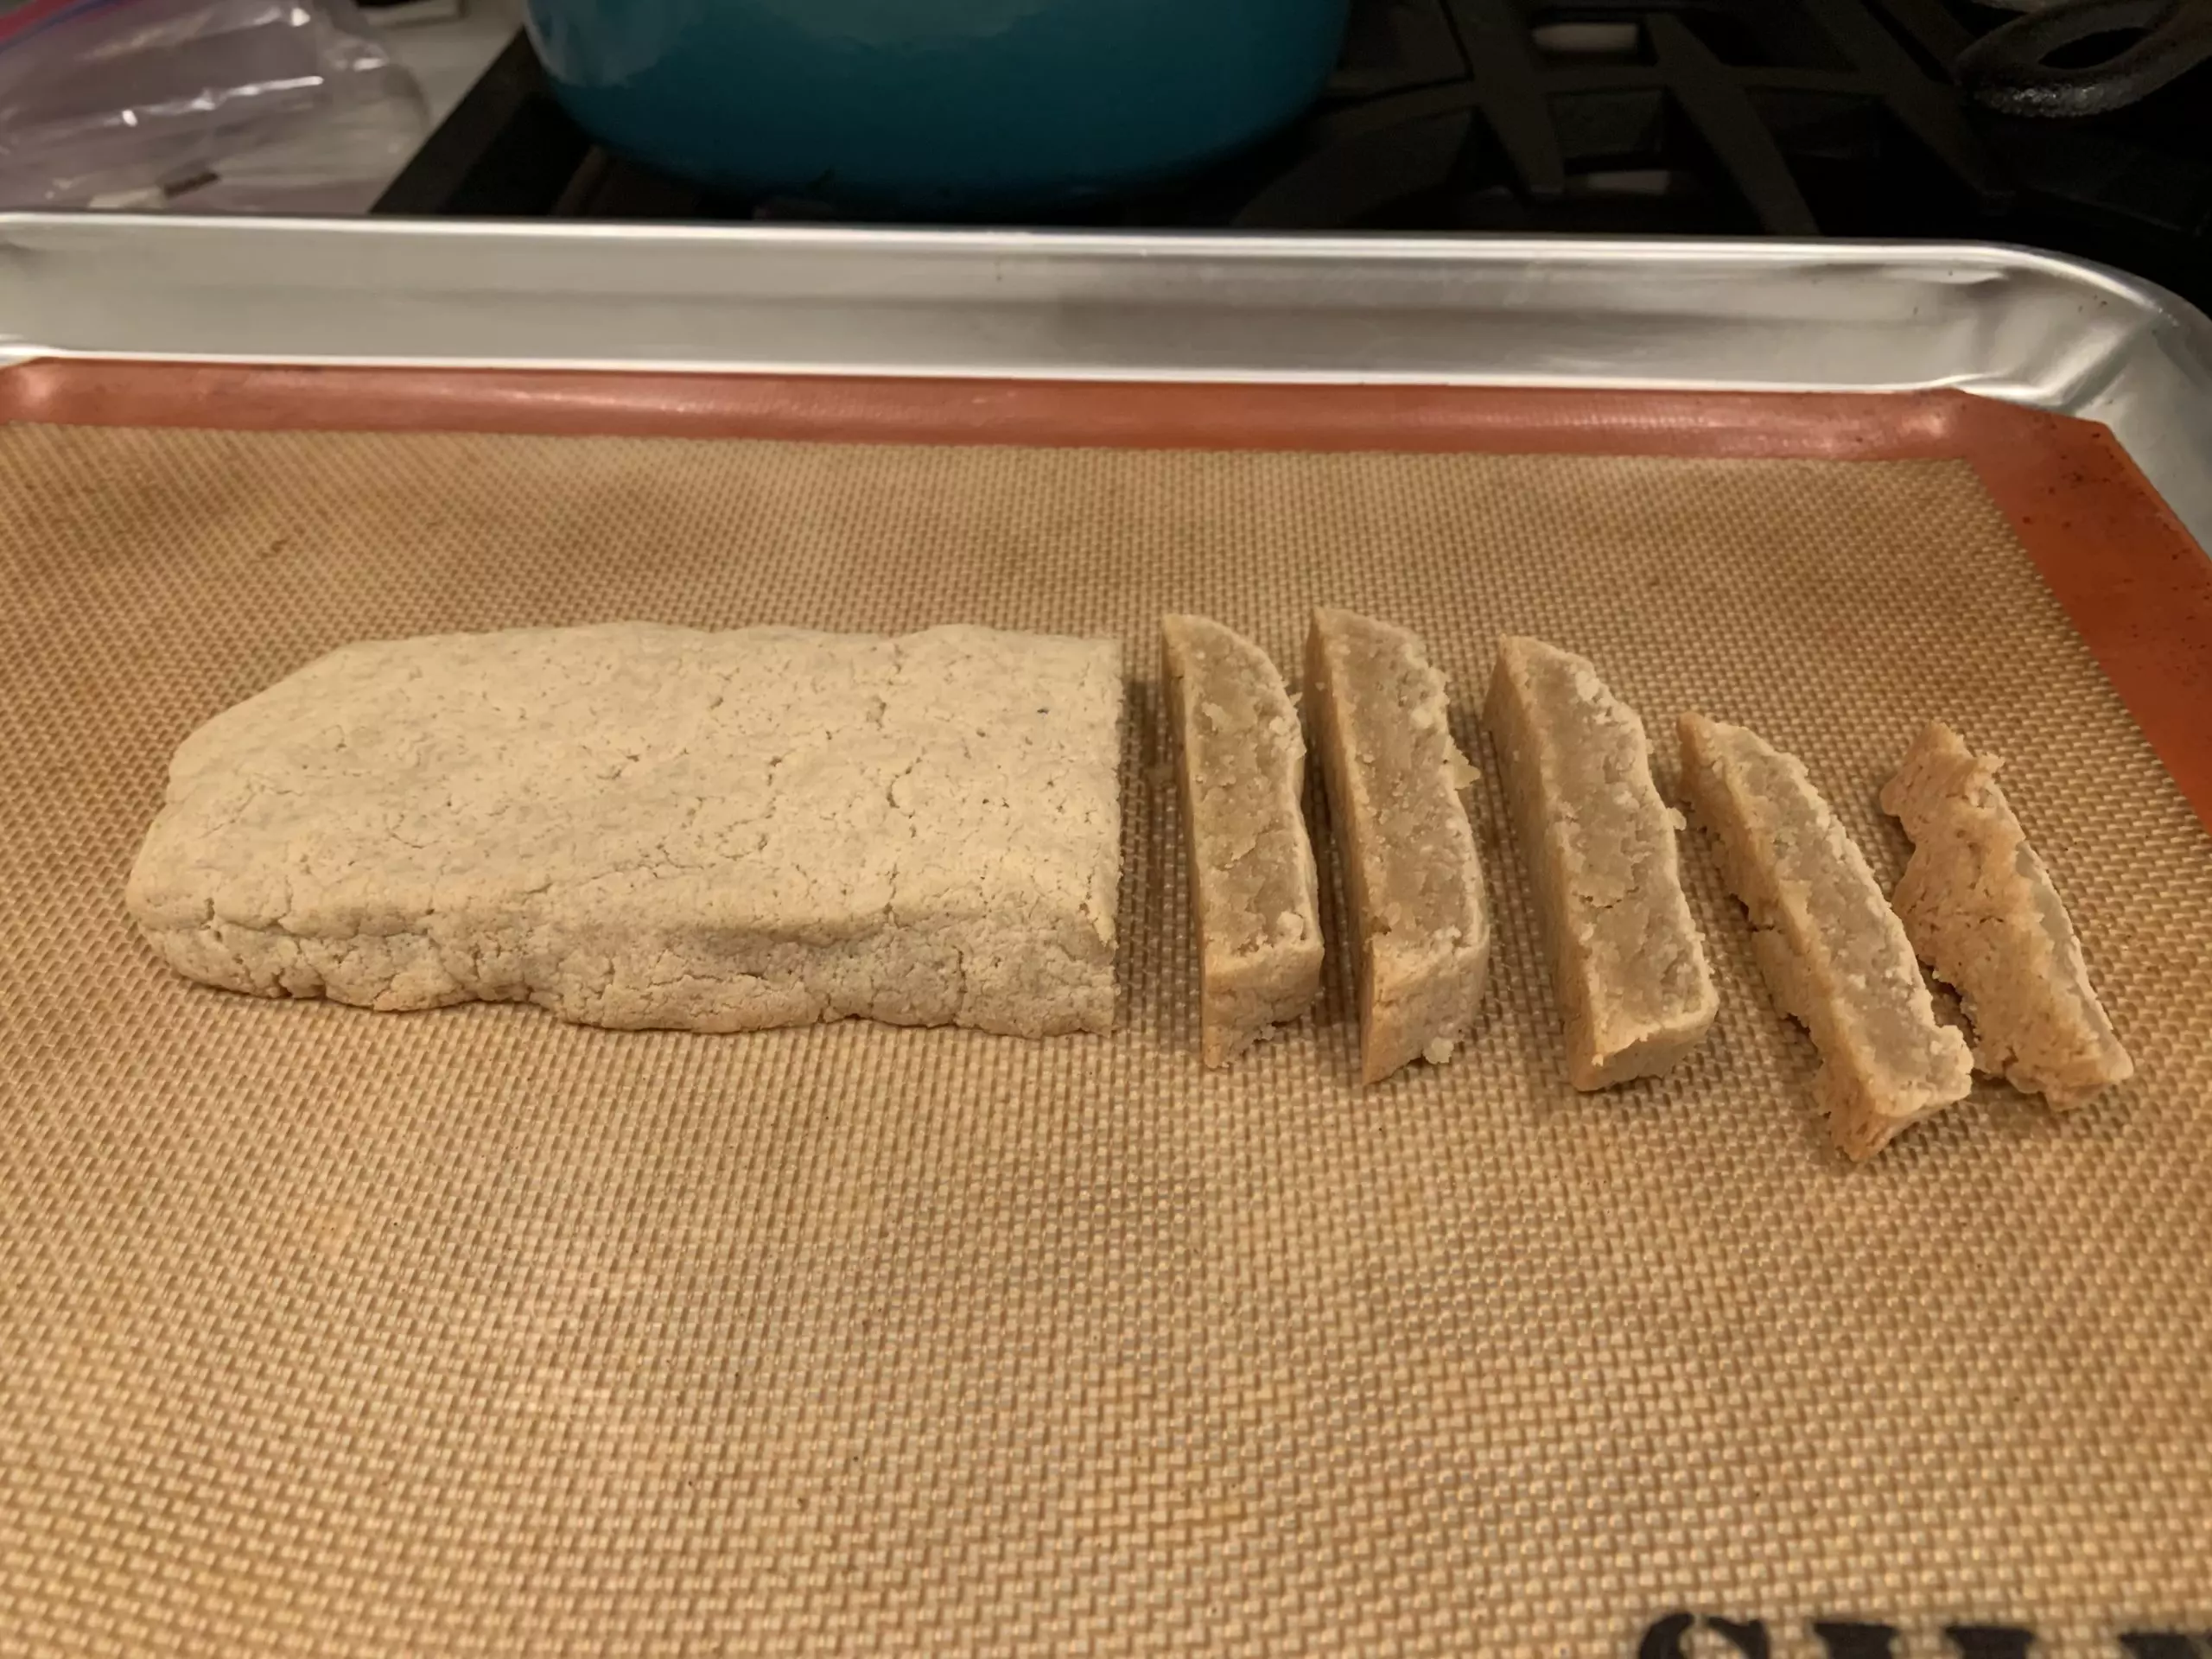 https://comfybelly.com/wp-content/uploads/2009/03/Anise-Biscotti-sliced-scaled.jpg.webp